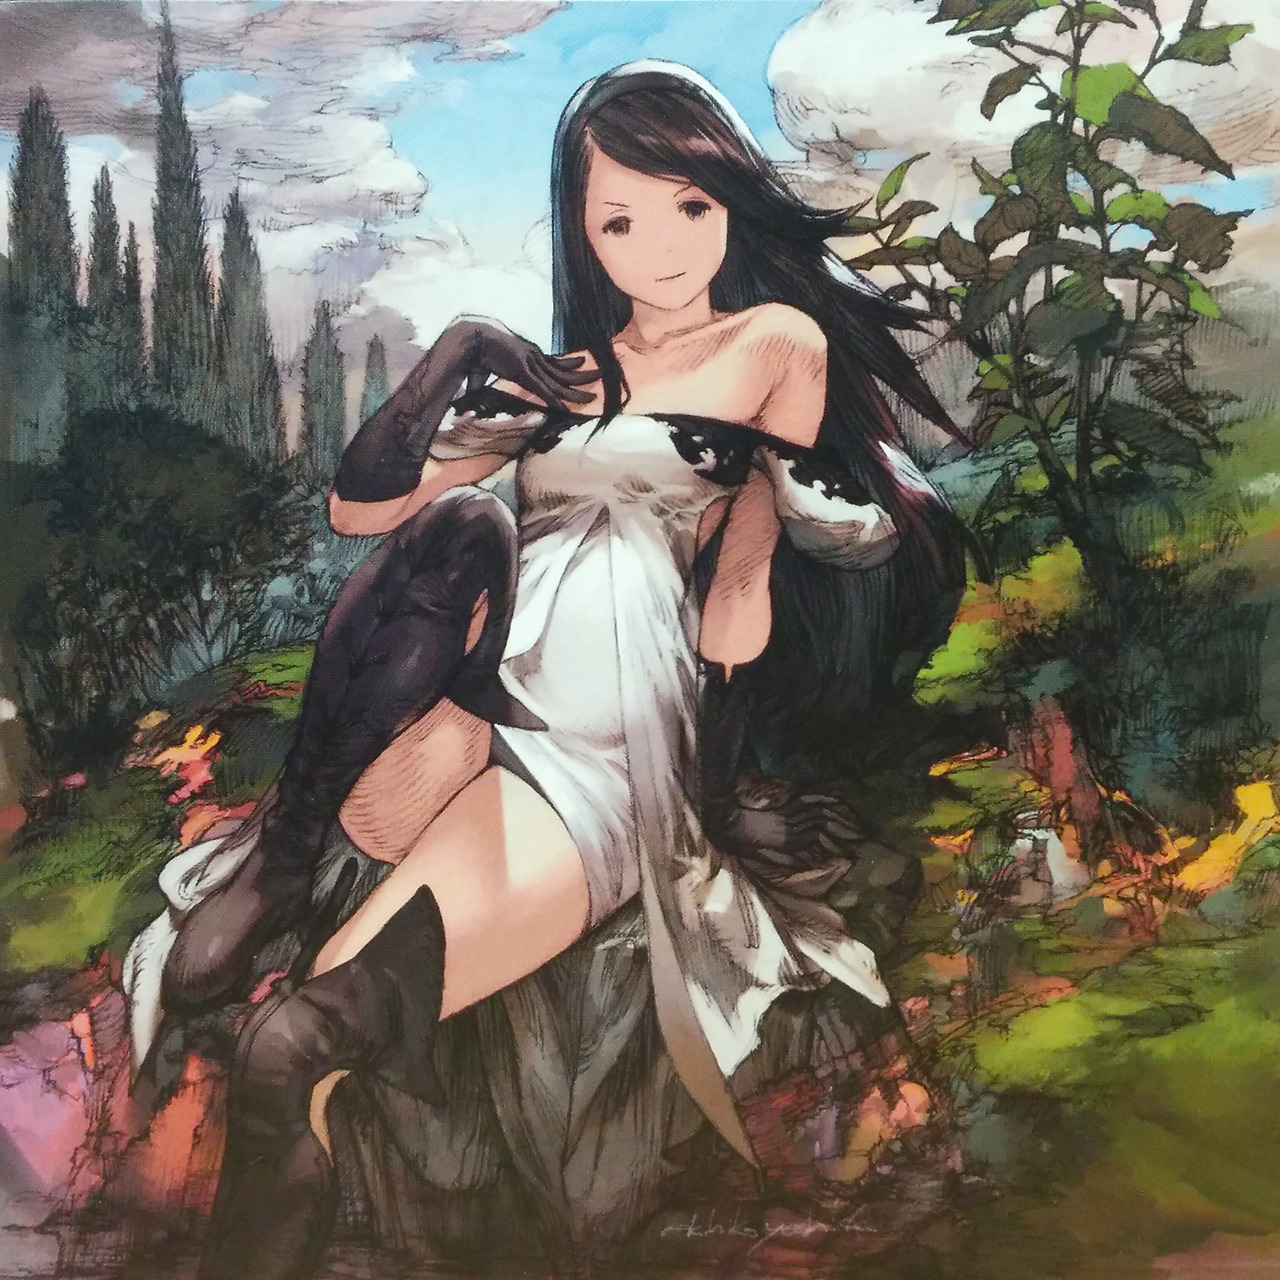 Agnes Oblige - Characters - Introduction, Bravely Default